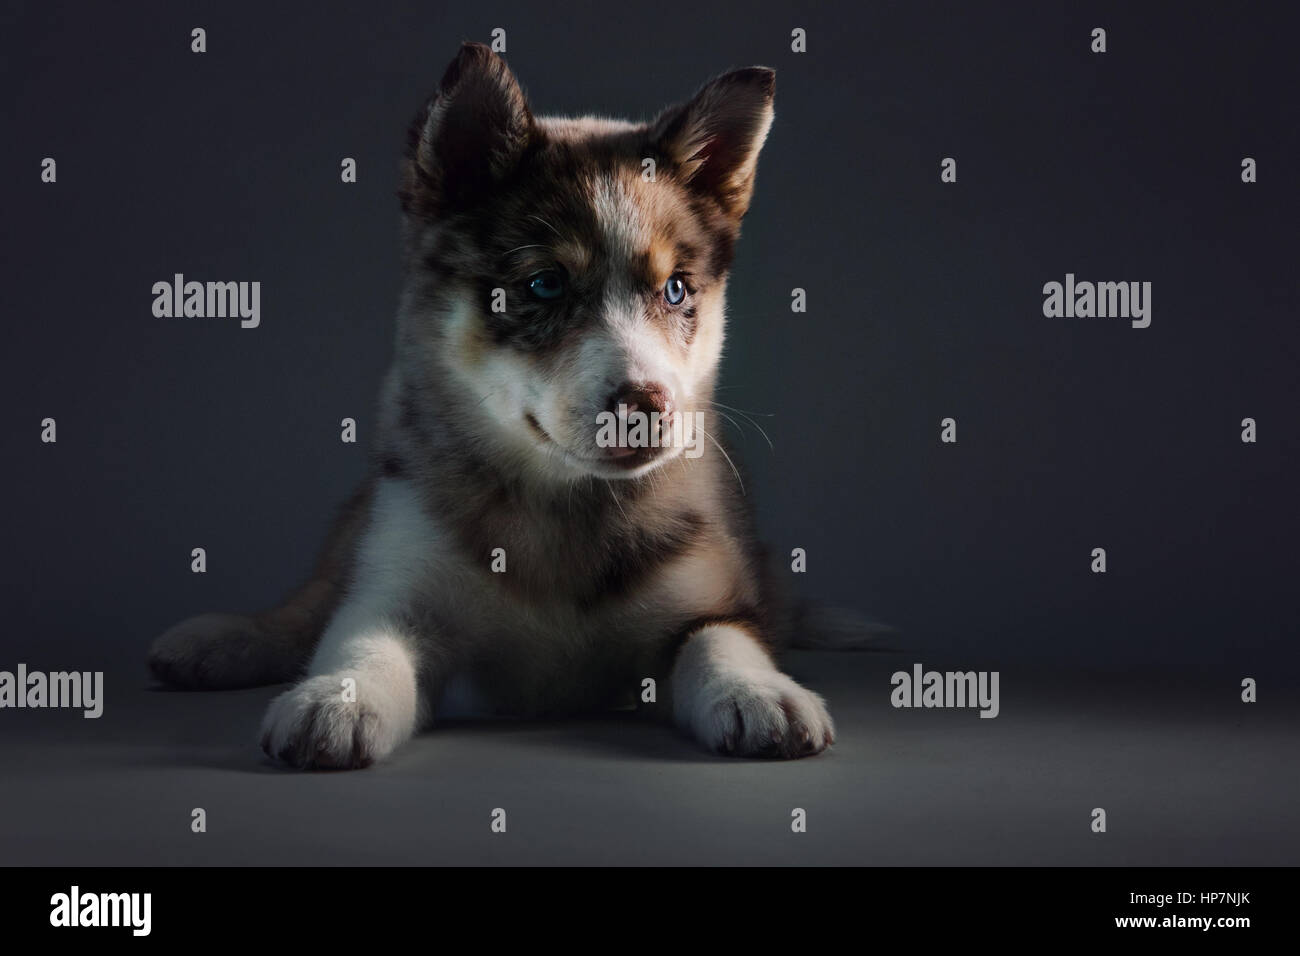 Full-body studio portrait of a blue-eyed Pomsky puppy looking alertly at camera. Stock Photo